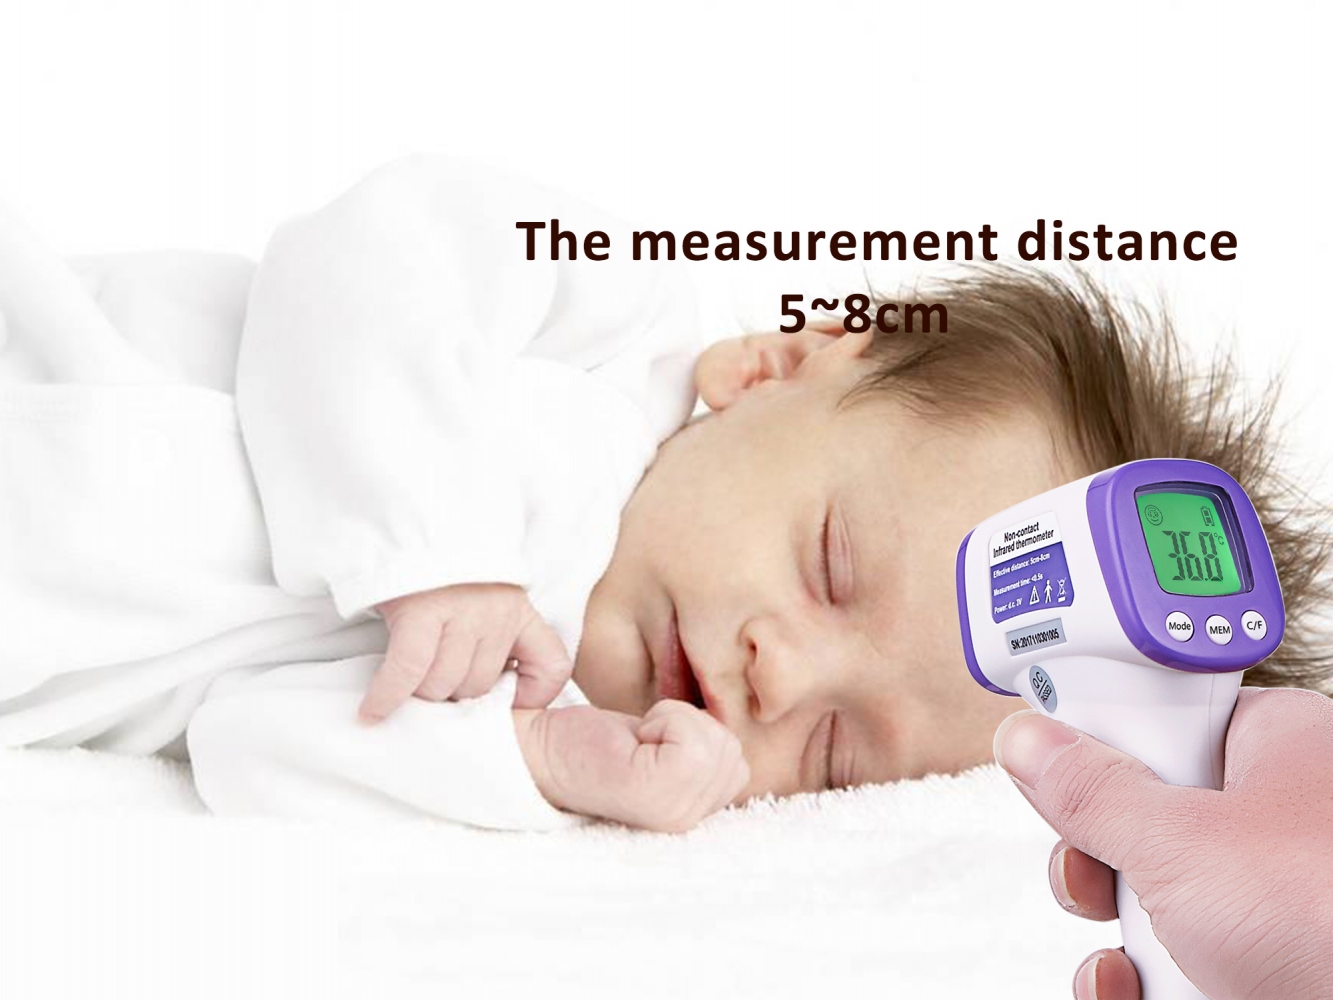 pics/simzo/simzo-hw-302-infrared-thermometer-measure-distance.jpg